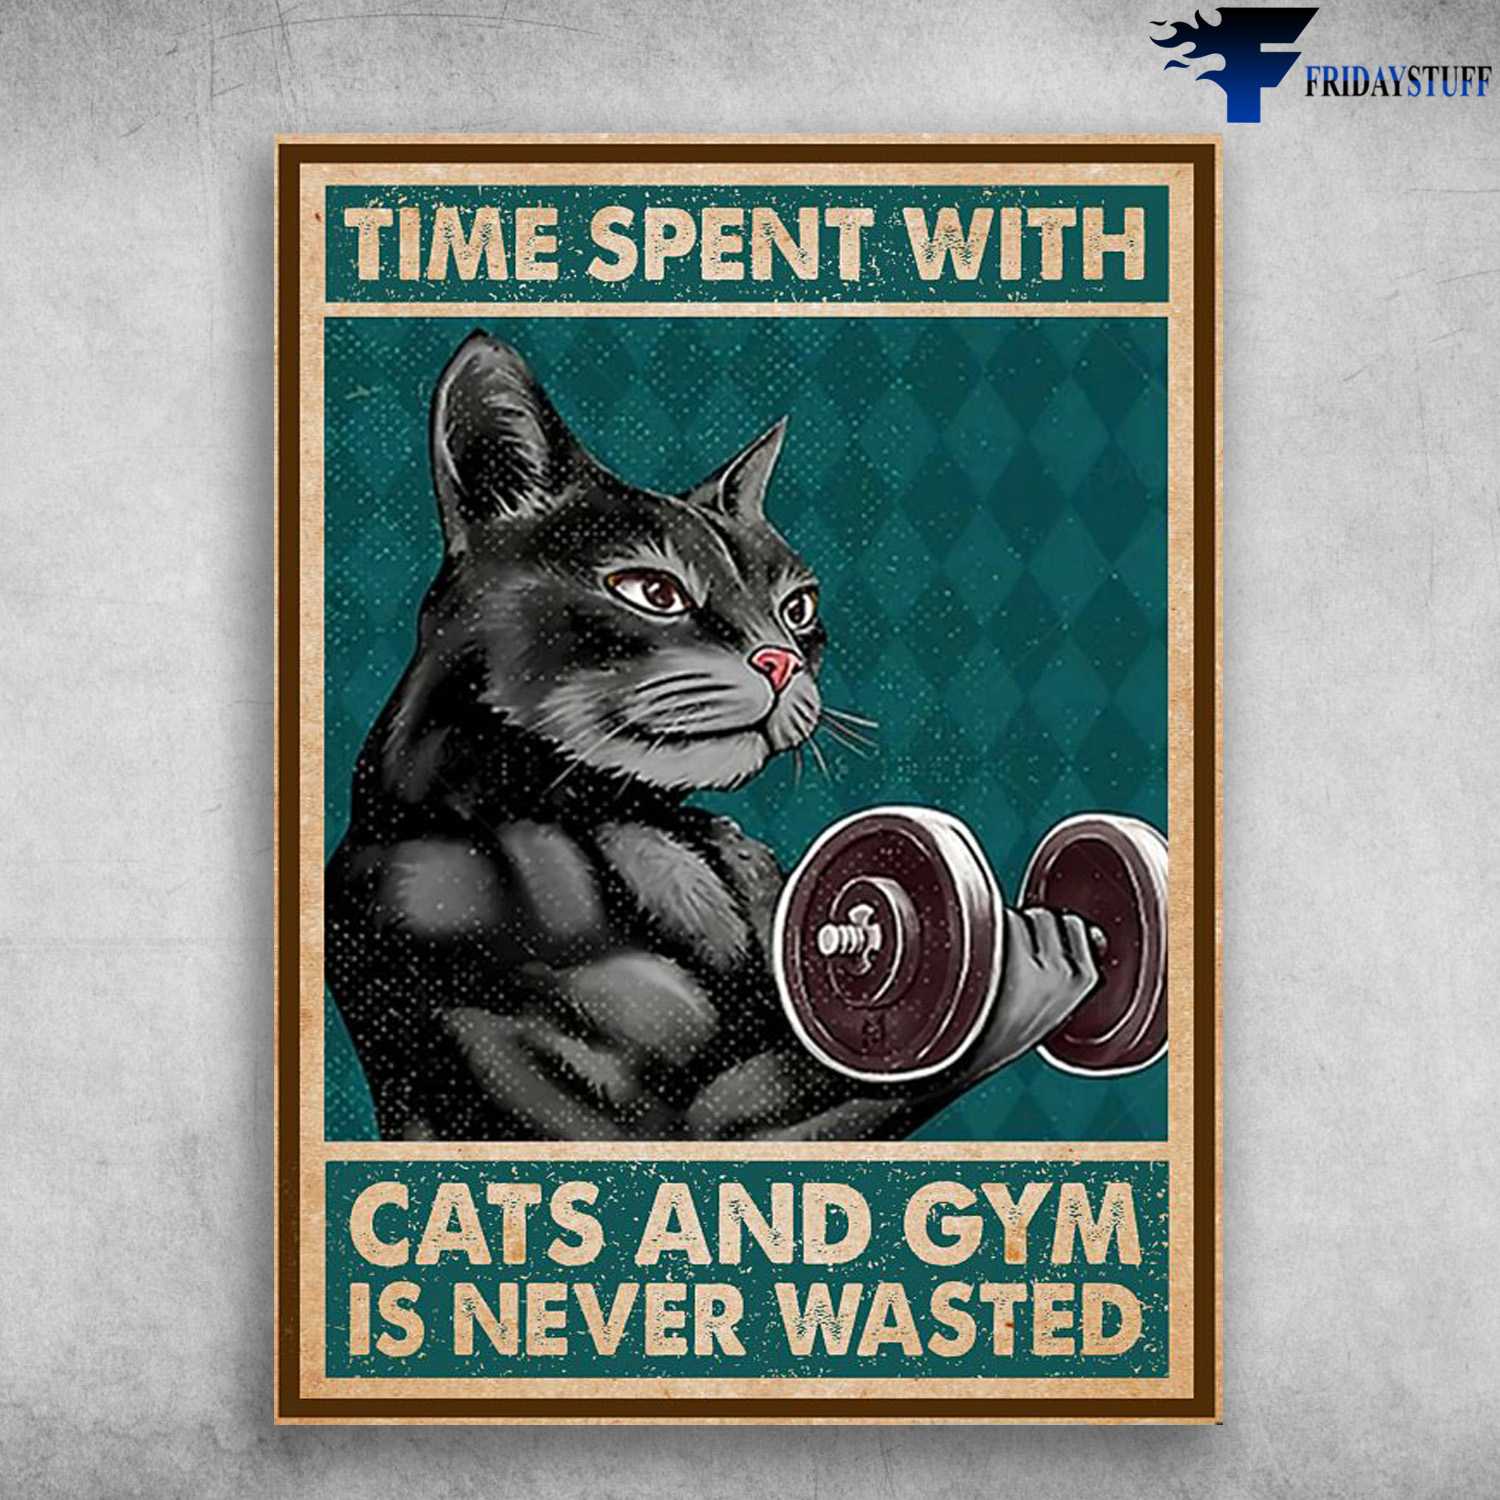 Black Cat Poster, Gym Room, Time Spent With Cats And Gym, Is Never Wasted